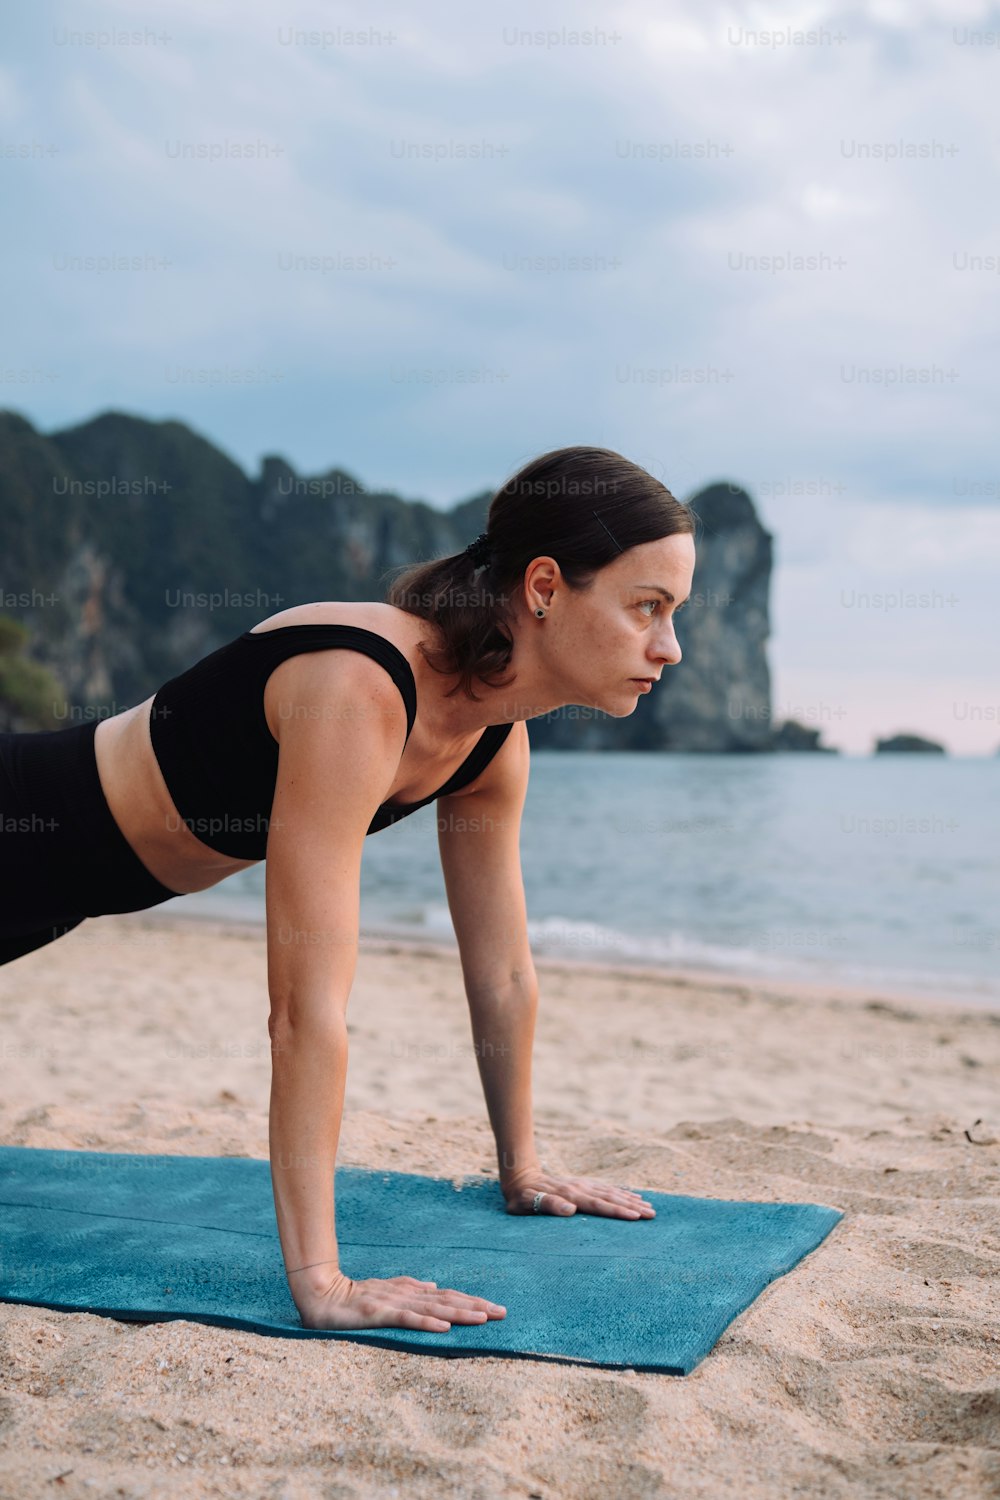 a woman is doing a push up on a towel on the beach